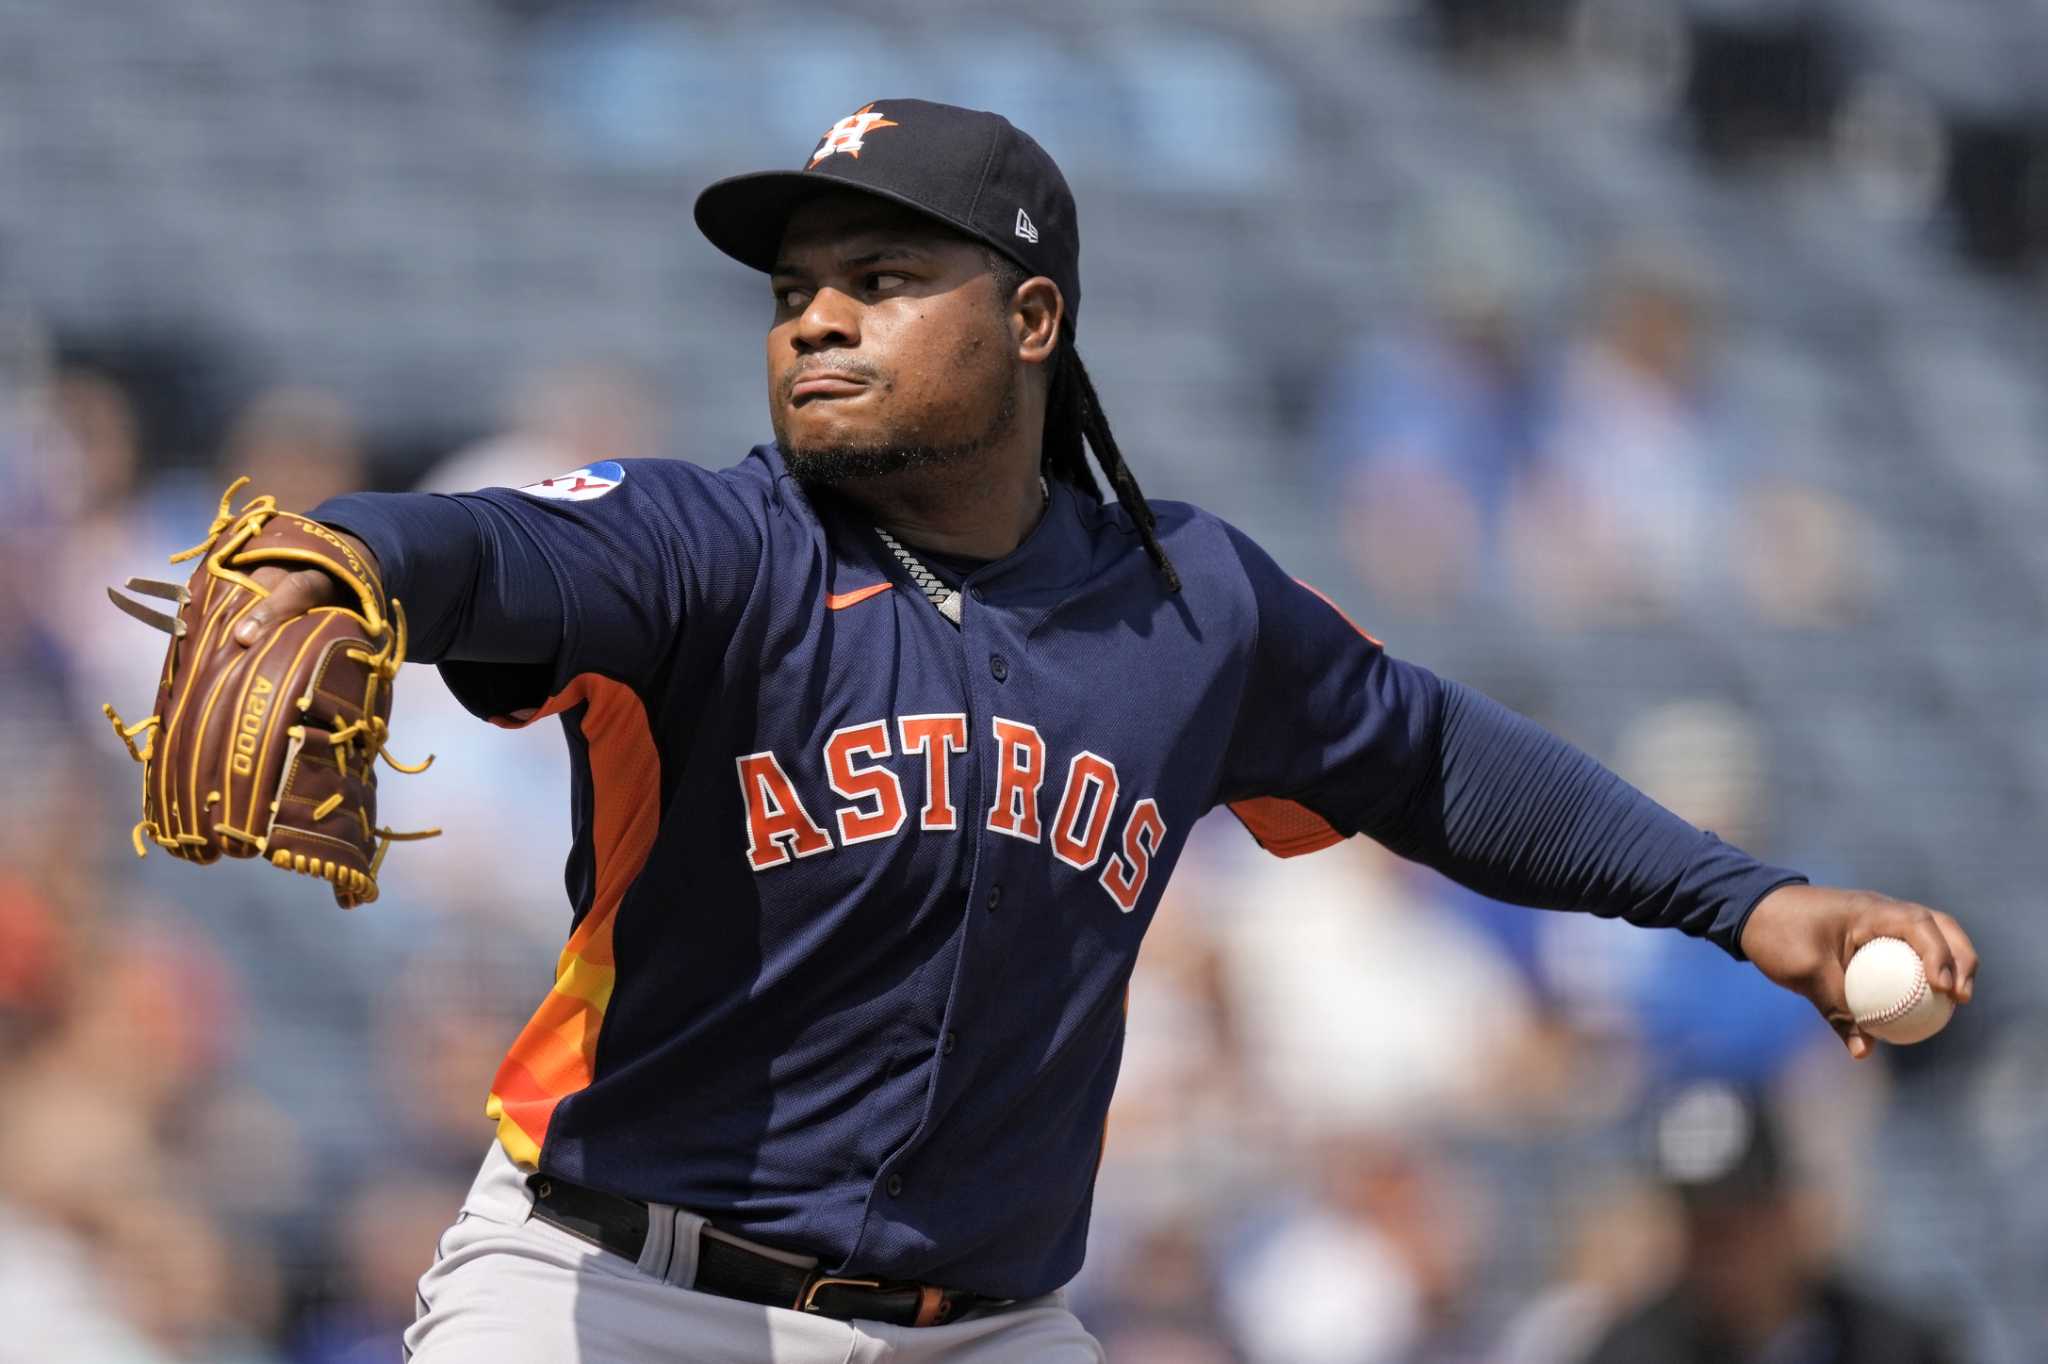 Houston Astros defeat Kansas City Royals in Sunday’s game